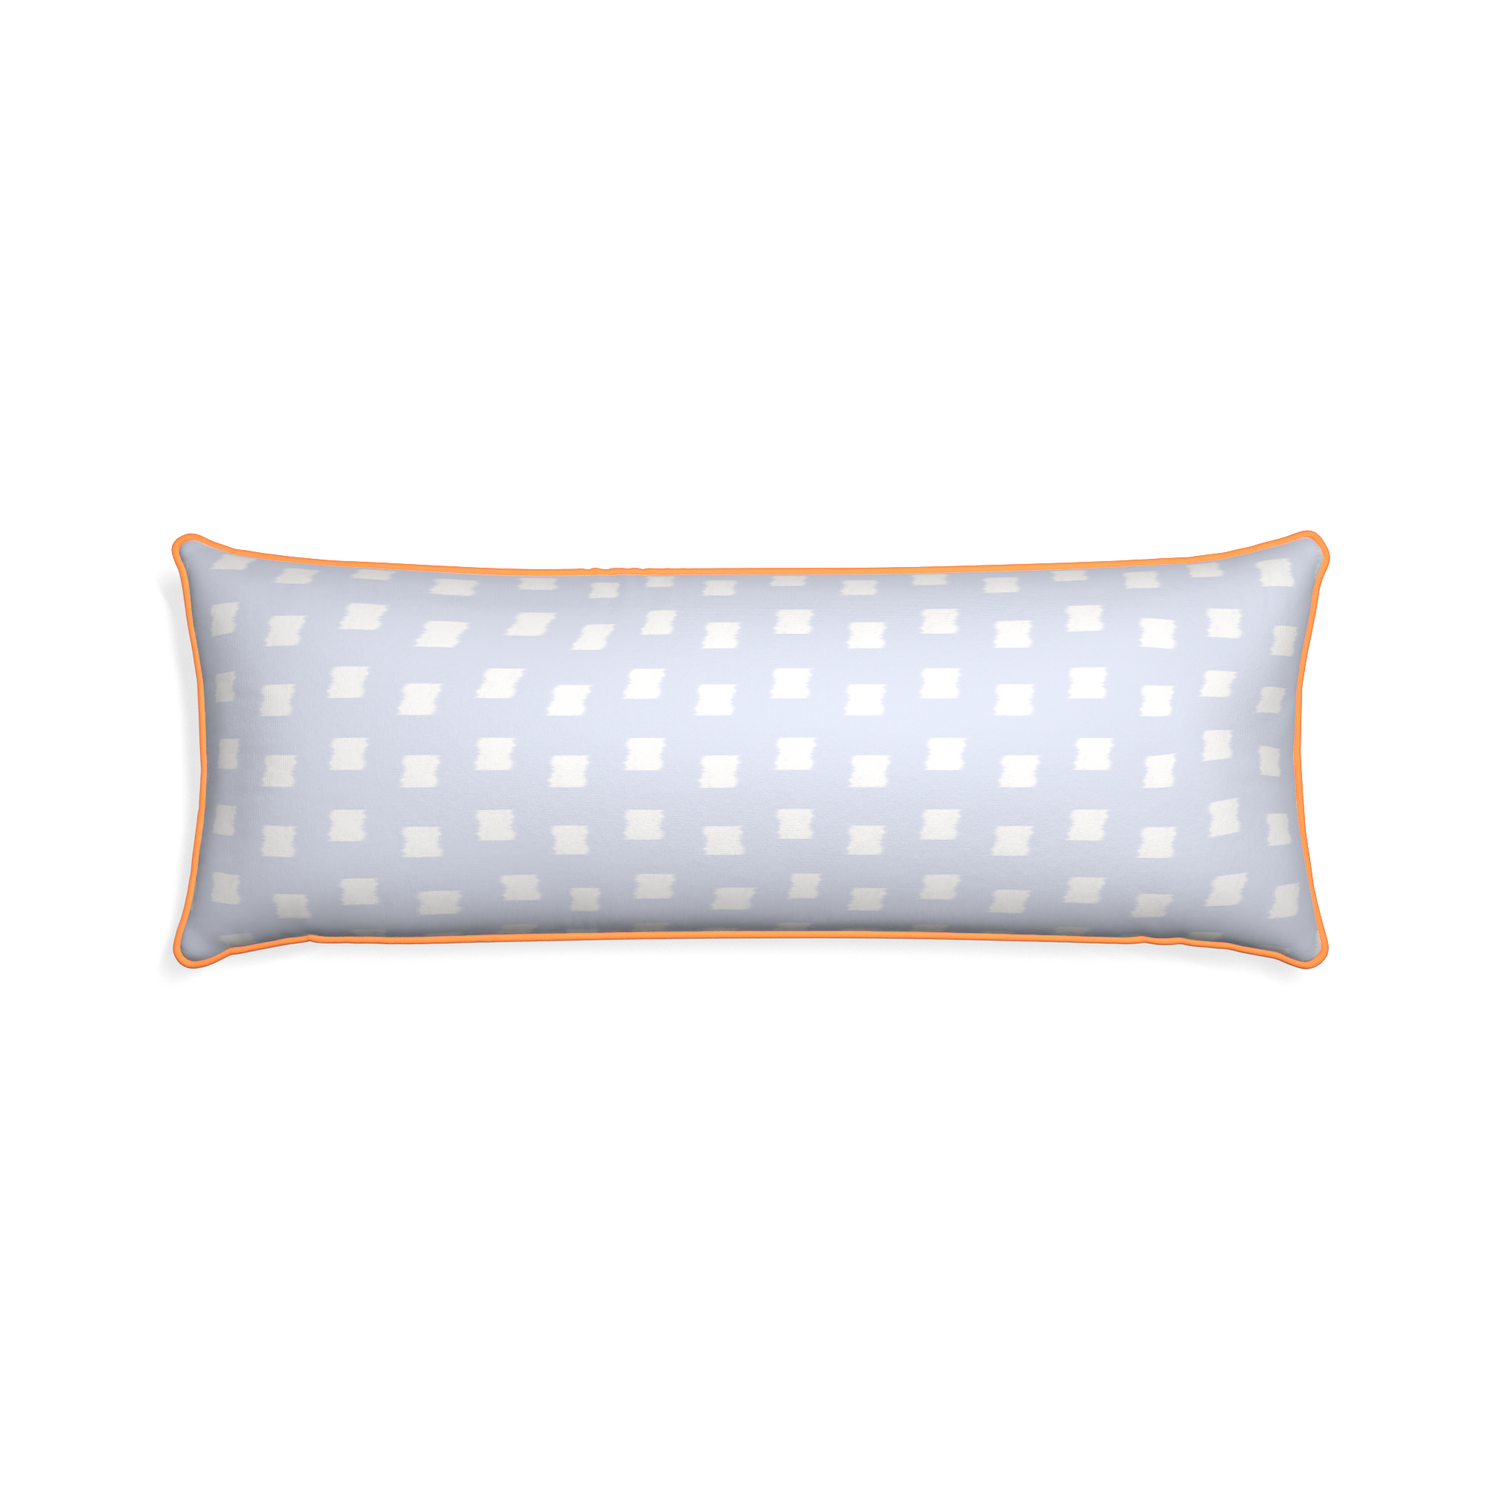 Xl-lumbar denton custom sky blue patternpillow with clementine piping on white background